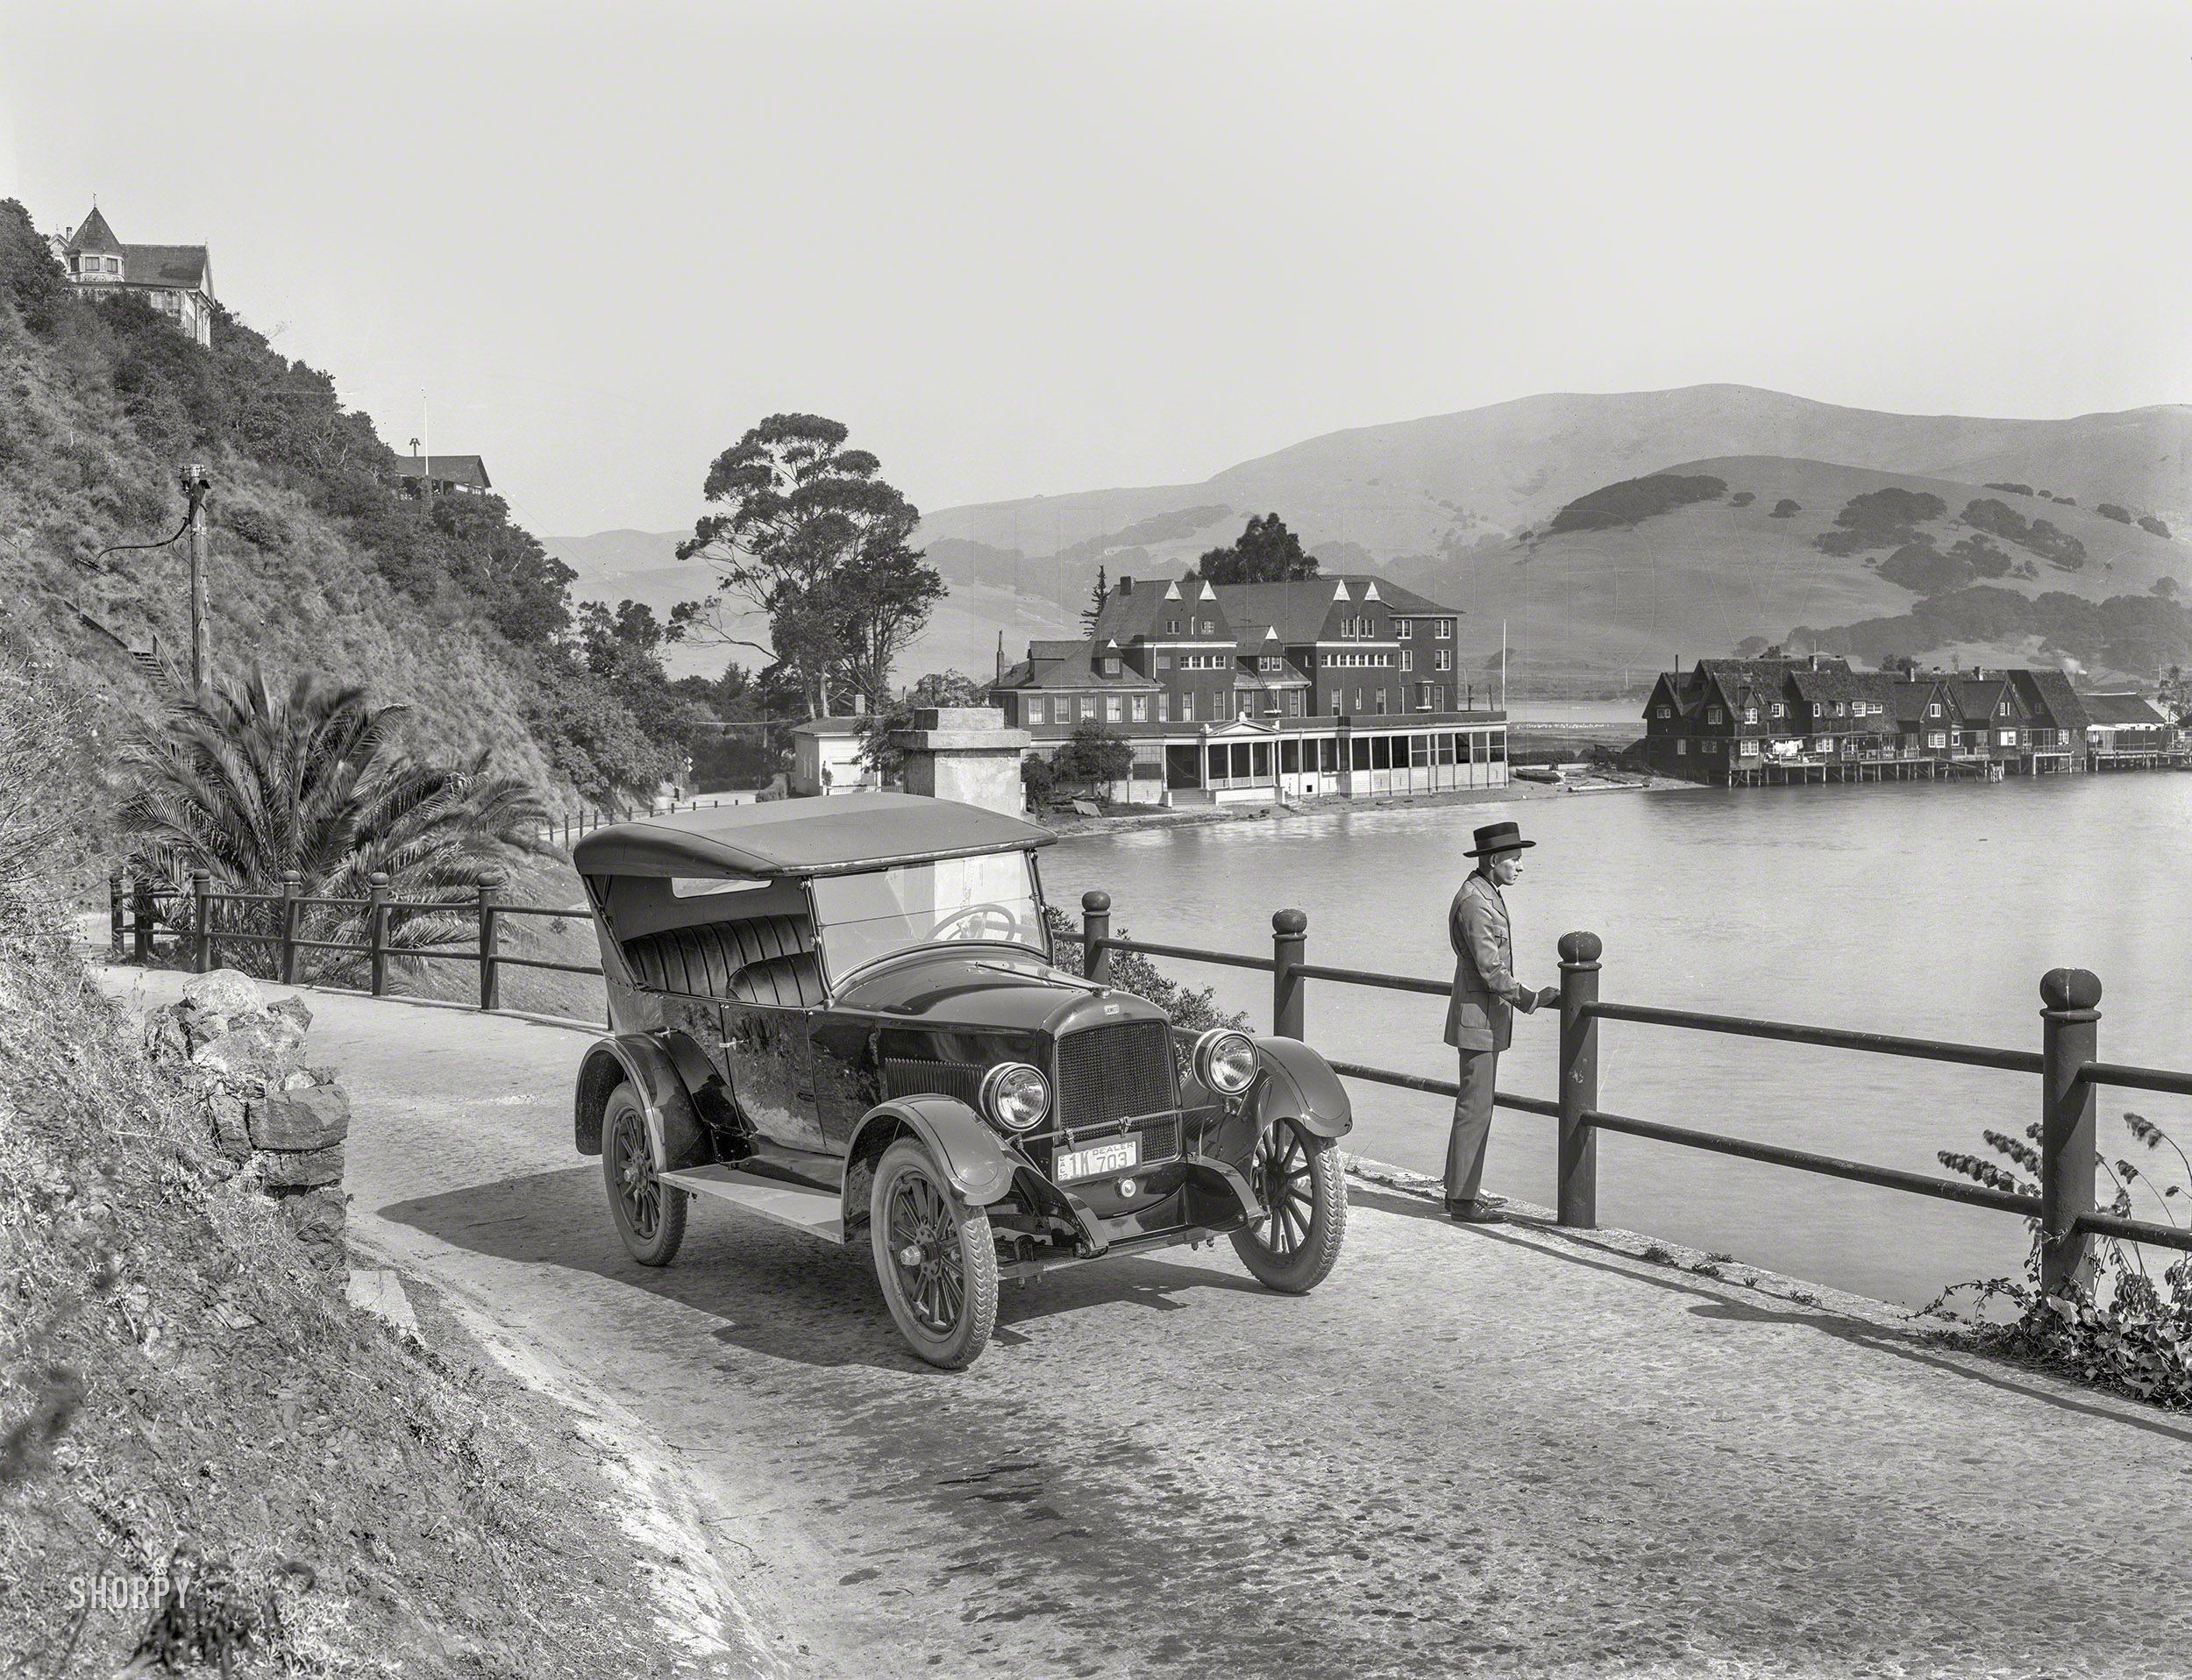 "Jewett touring car." Somewhere in Northern California, sometime in 1922, and You Are There. Blocking traffic. 8x6 inch glass negative. View full size.